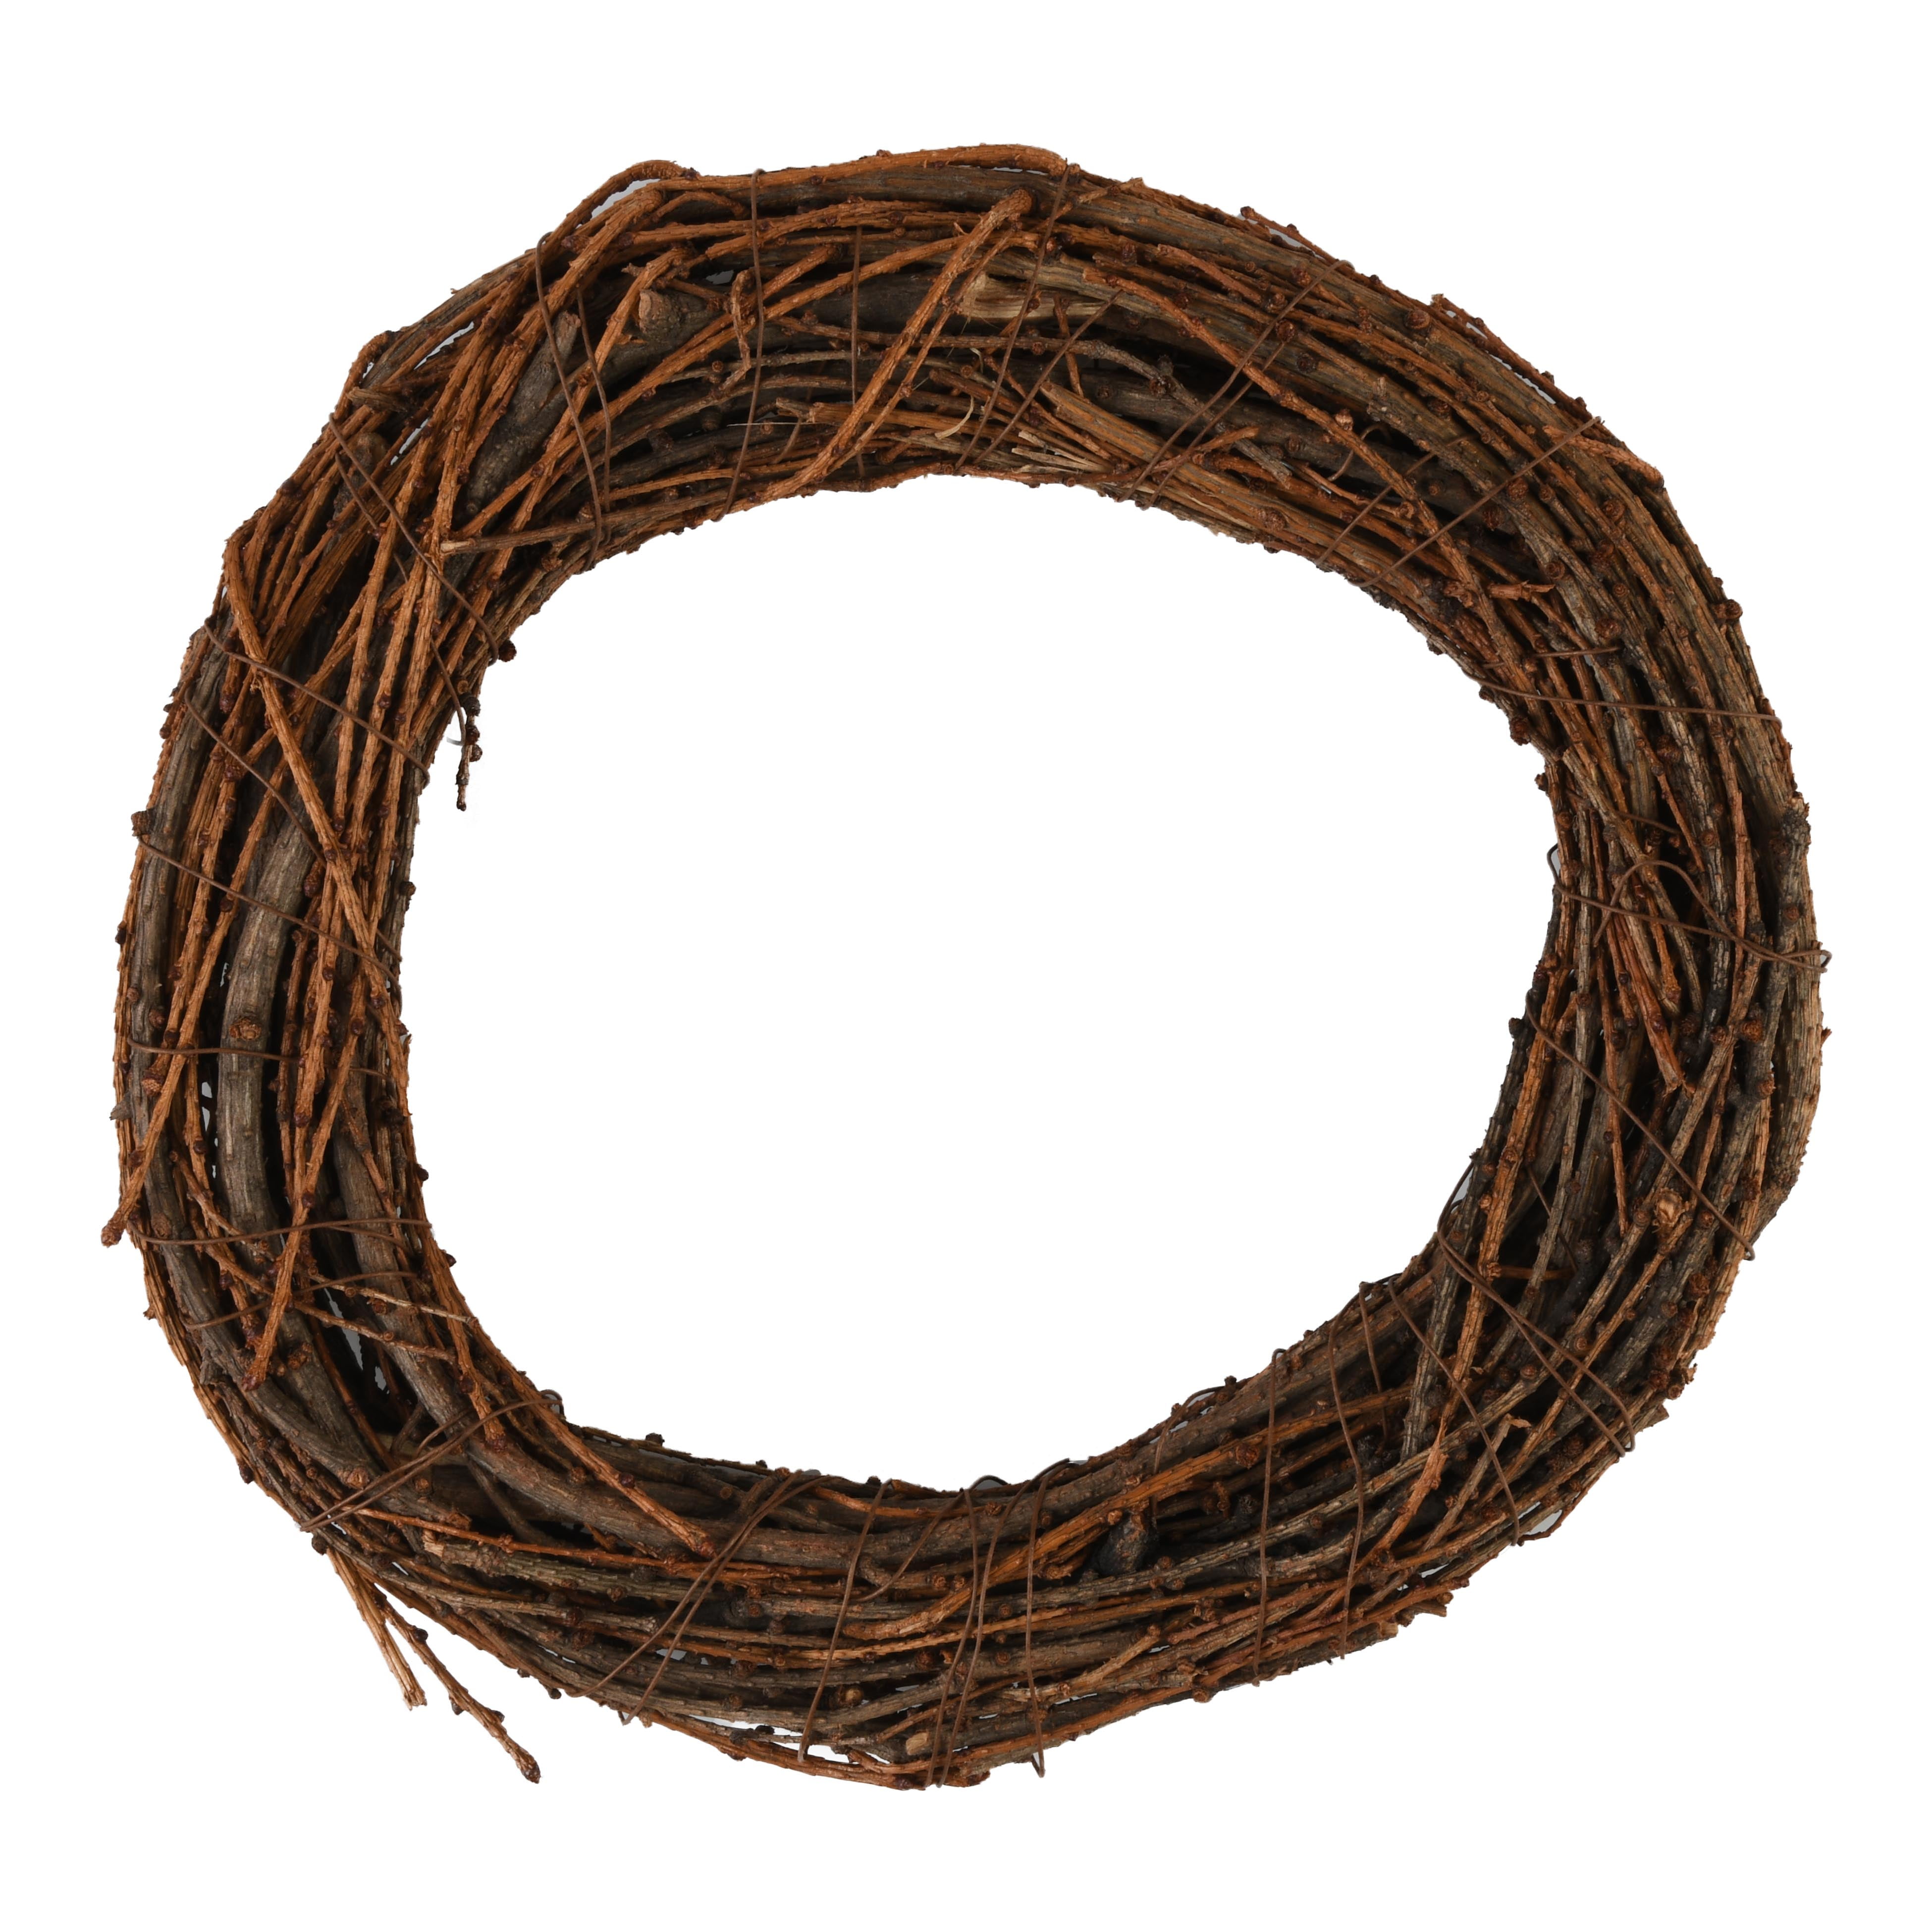 12 Inch PEPPERLONELY 1 PC Natural Grapevine Wreath 